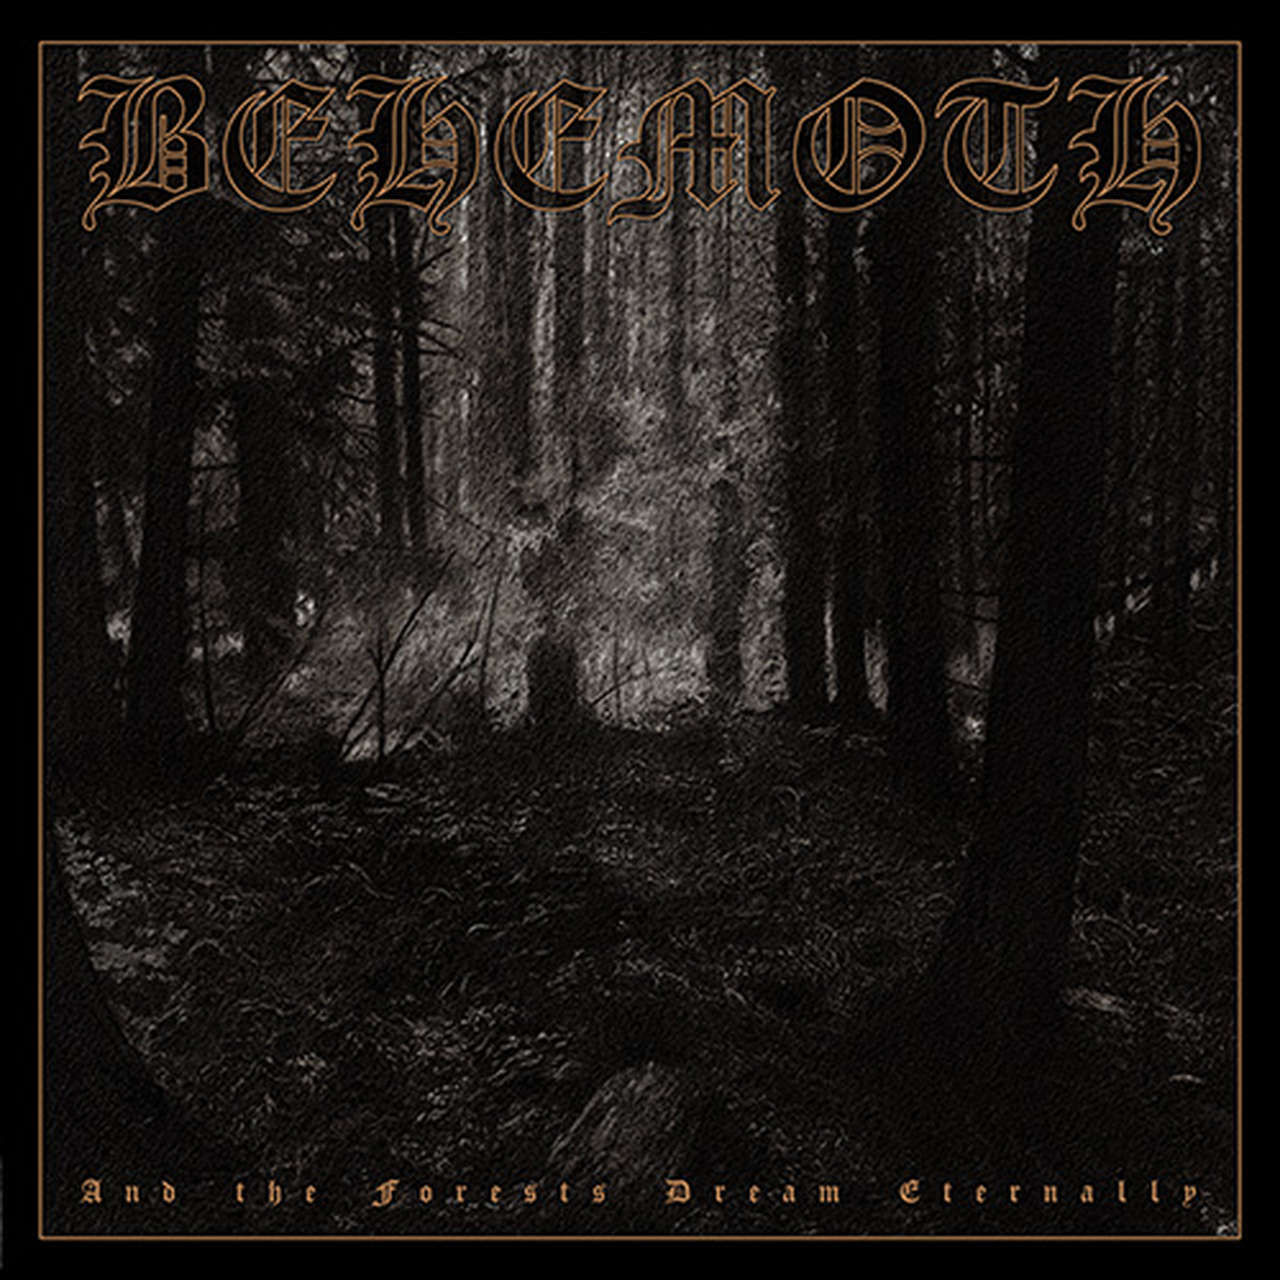 Behemoth - And the Forests Dream Eternally (2020 Reissue) (Ultimate Edition) (Mediabook 2CD)